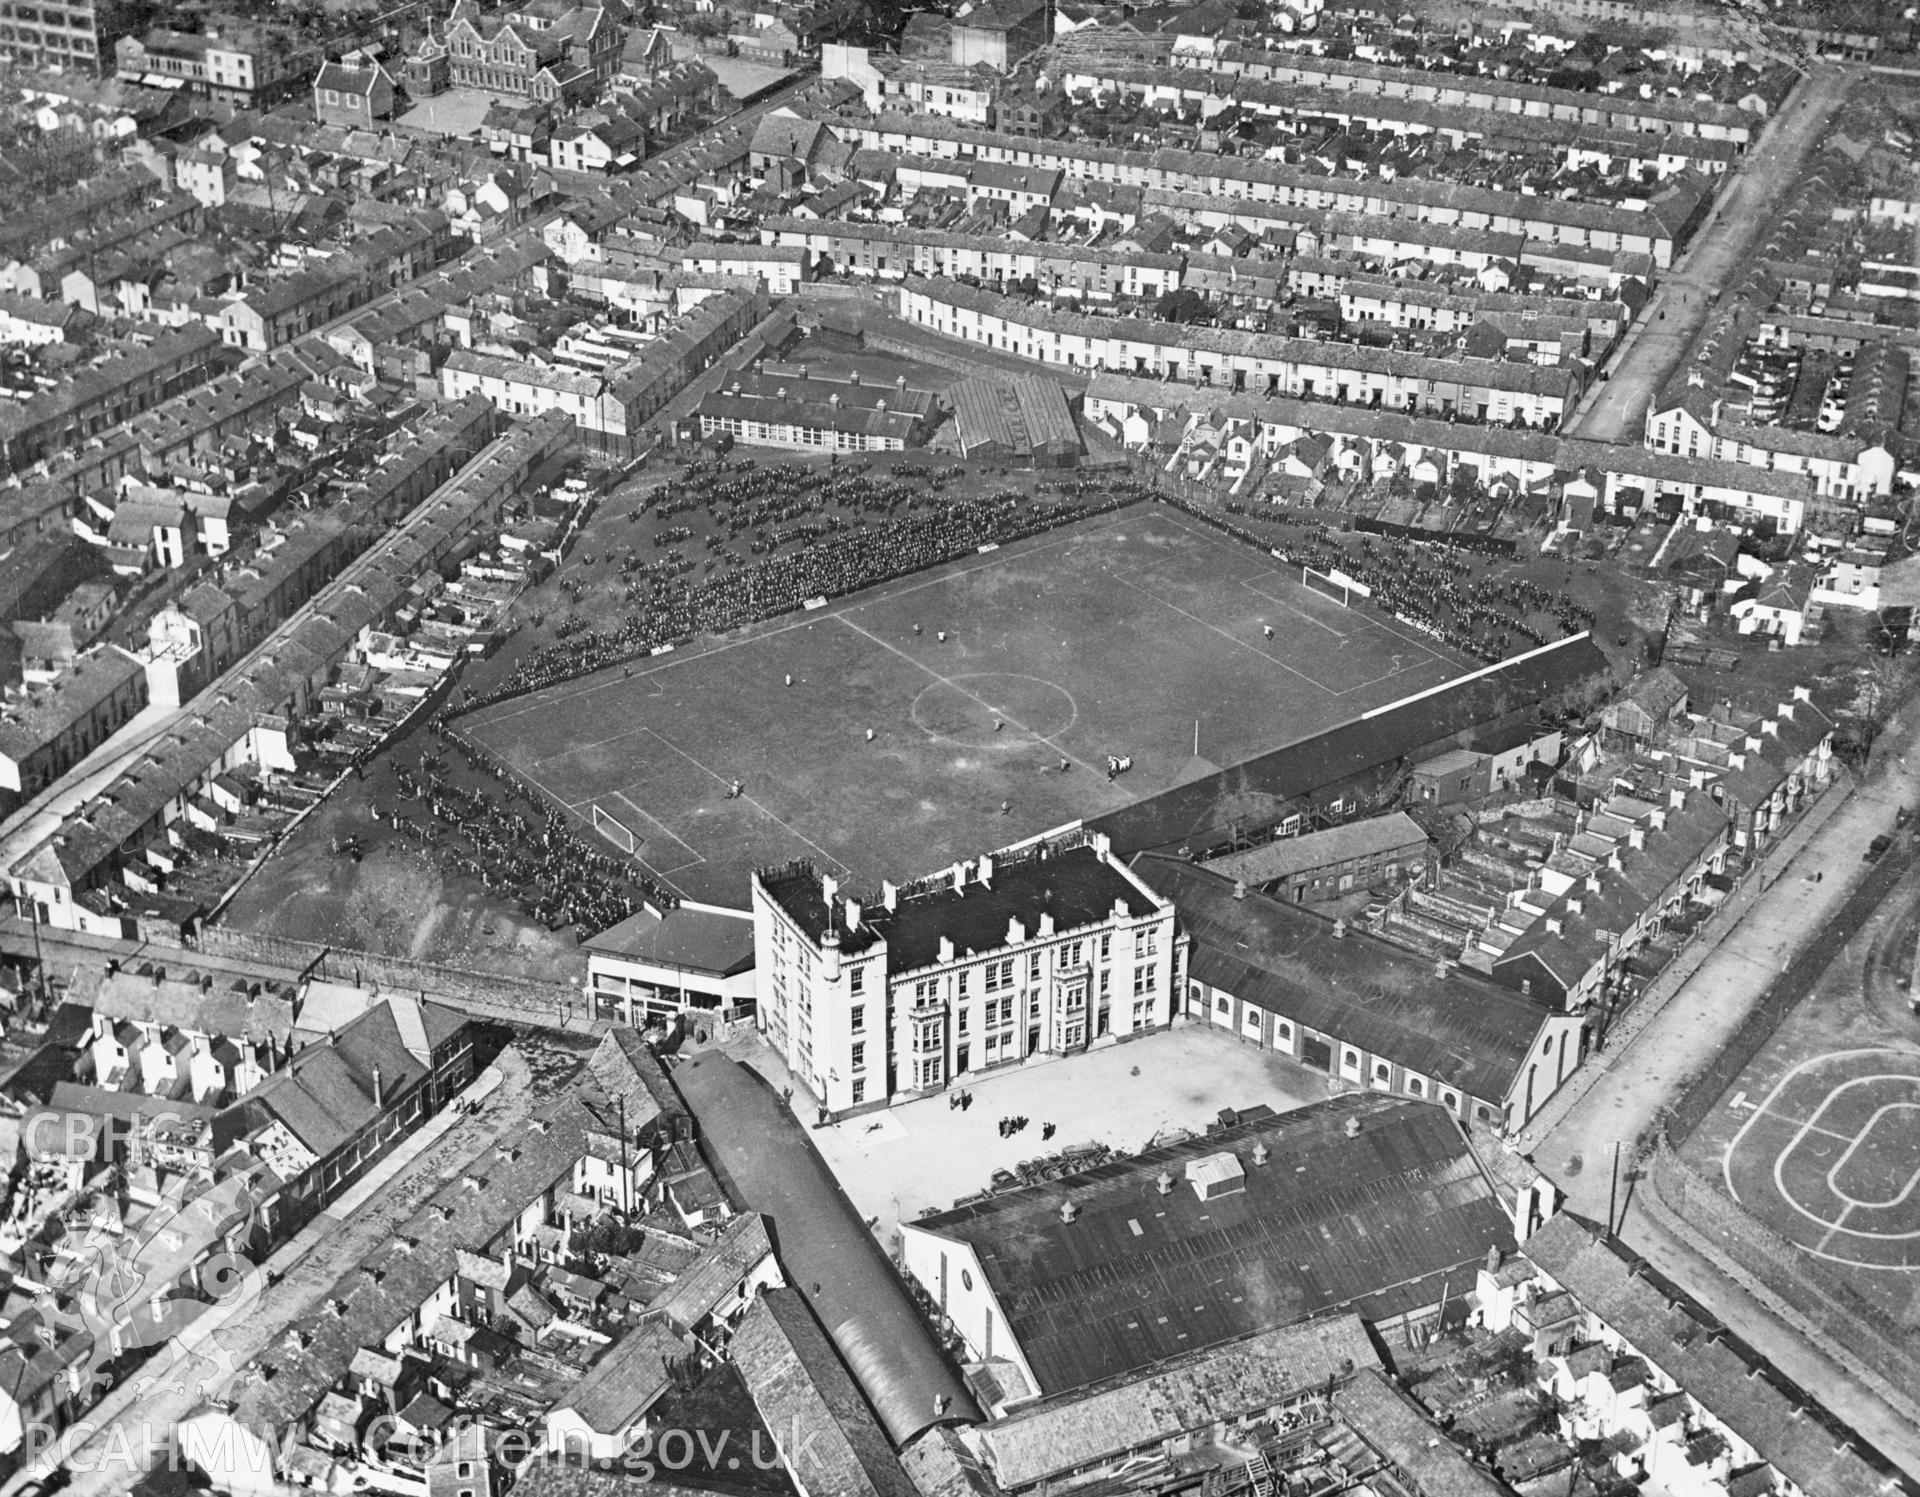 View of Vetch Field football ground, Swansea, showing spectators watching match in progress. Oblique aerial photograph, 5?x4? BW glass plate.